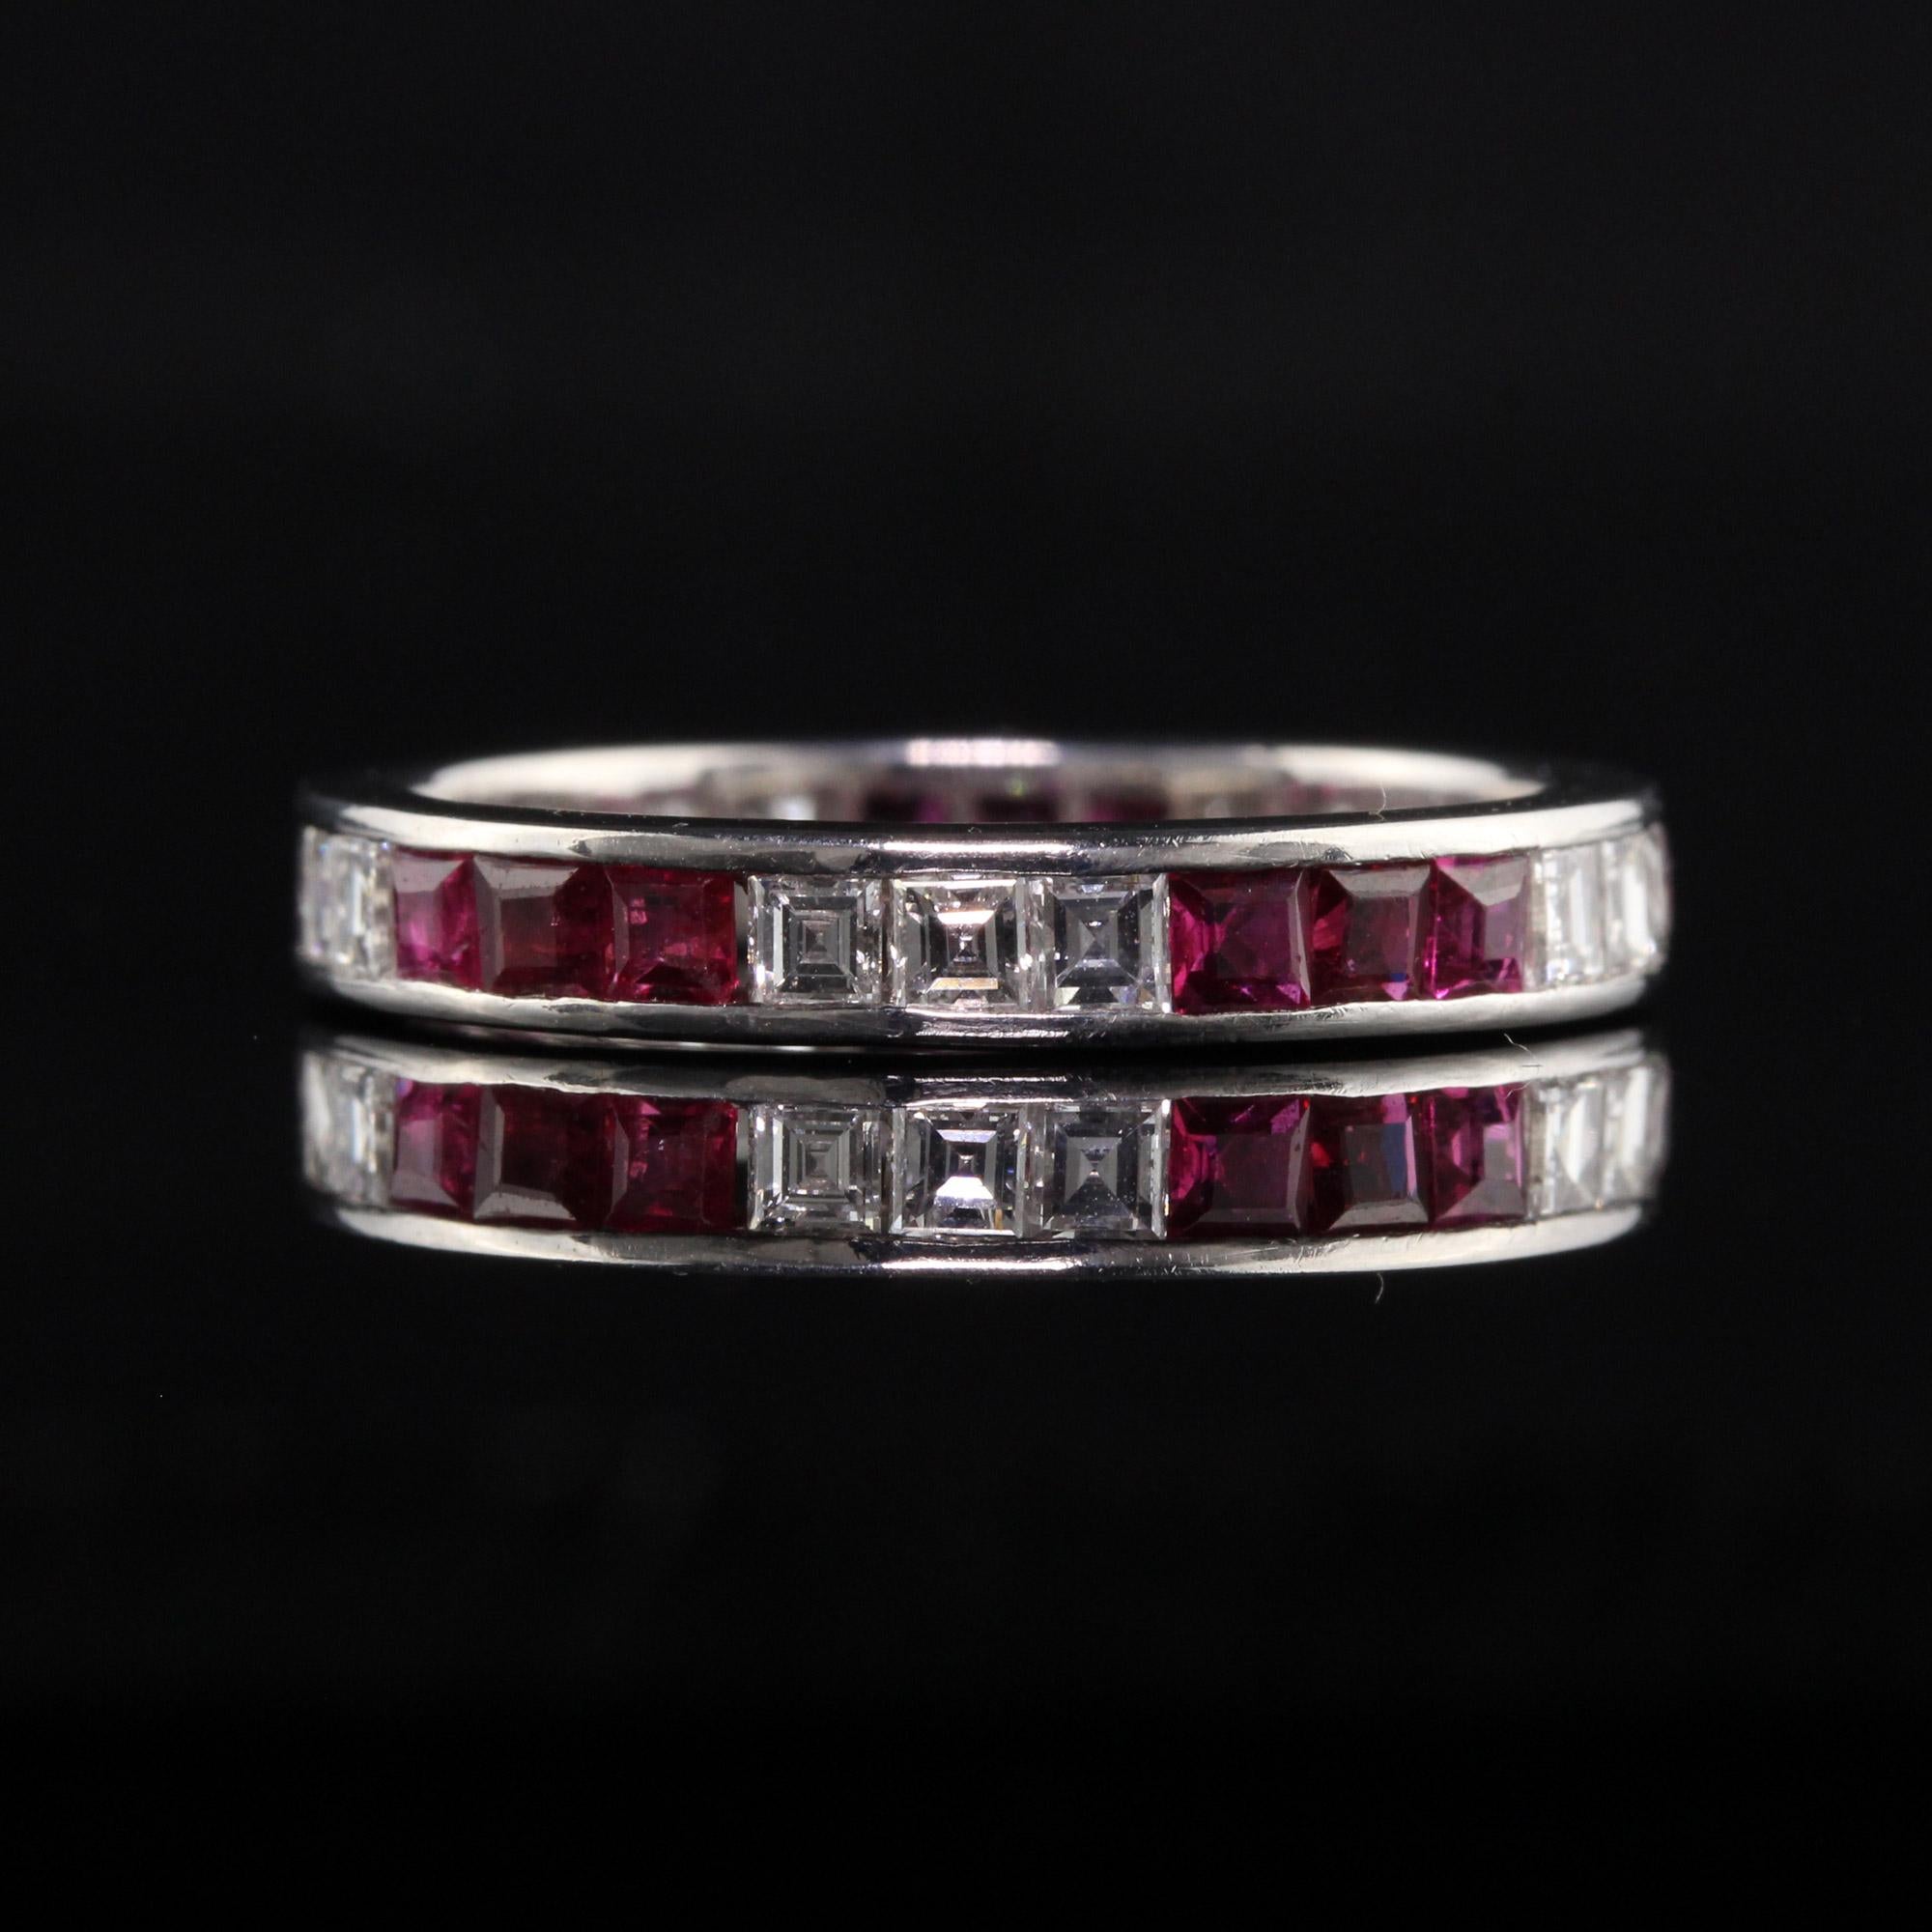 Antique Art Deco 18K White Gold Carre Cut Diamond and Ruby Wedding Band In Good Condition For Sale In Great Neck, NY